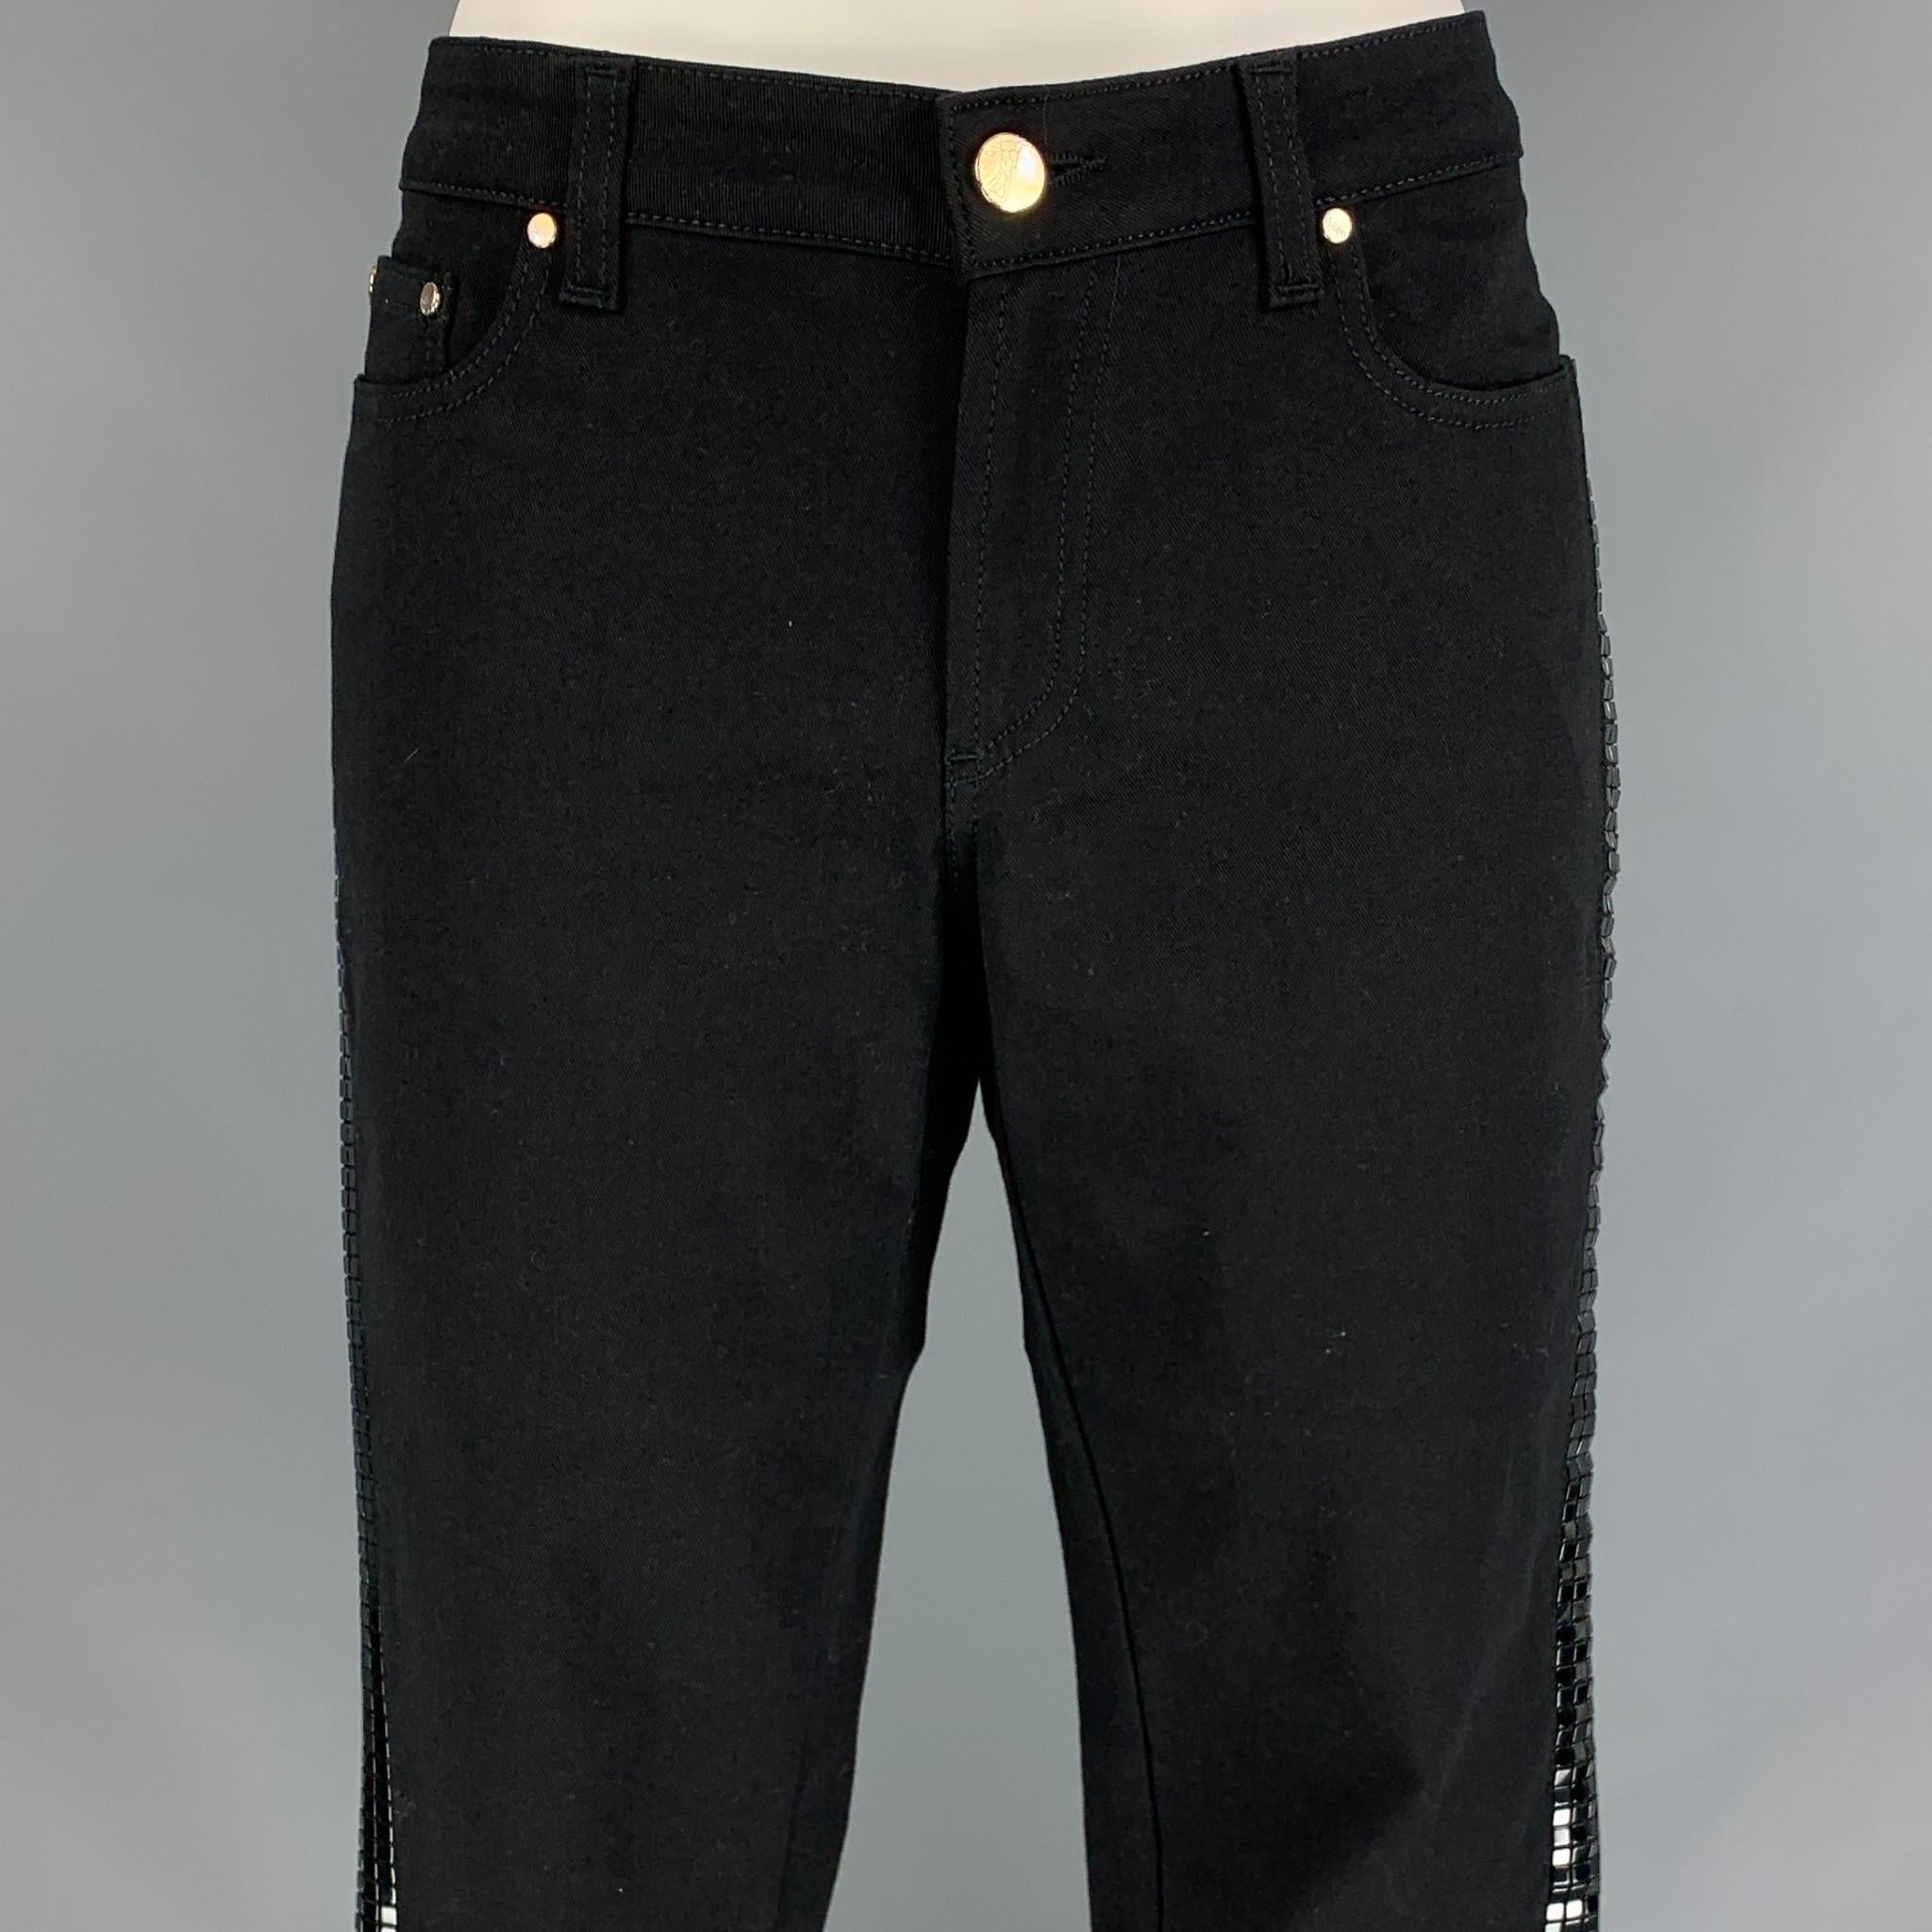 VERSACE COLLECTION casual pants comes in a black cotton blend featuring a skinny fit, side studded design, silver tone hardware, and a zip fly closure. Made in Romania.

New With Tags.
Marked:30

Measurements:

Waist: 32 in.
Rise: 8 in.
Inseam: 29